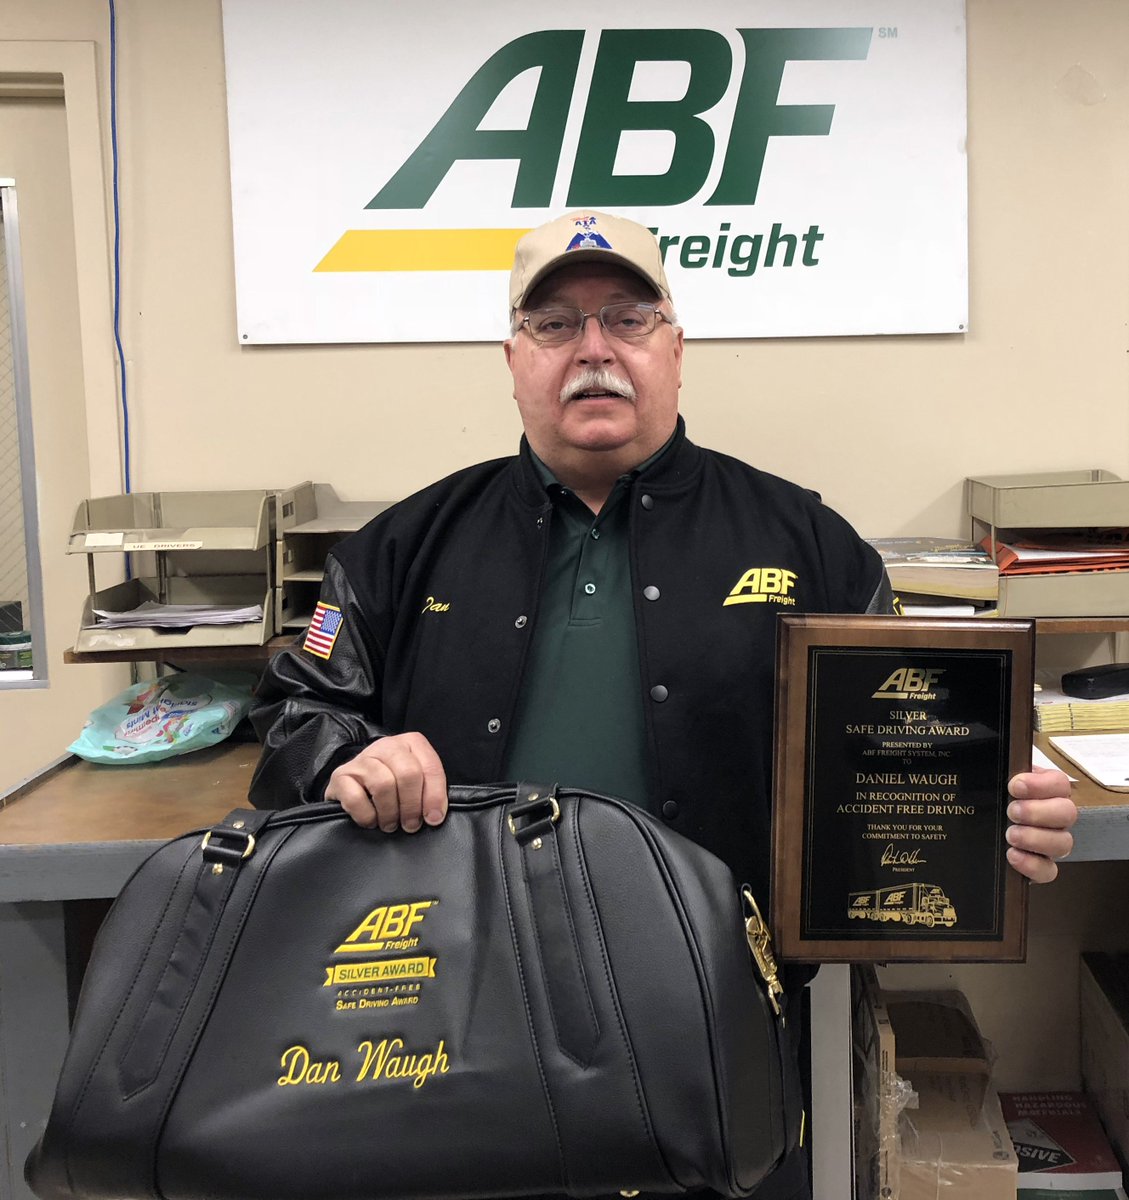 Abf Freight On Twitter Congratulations To Abf Freight Driver Dan